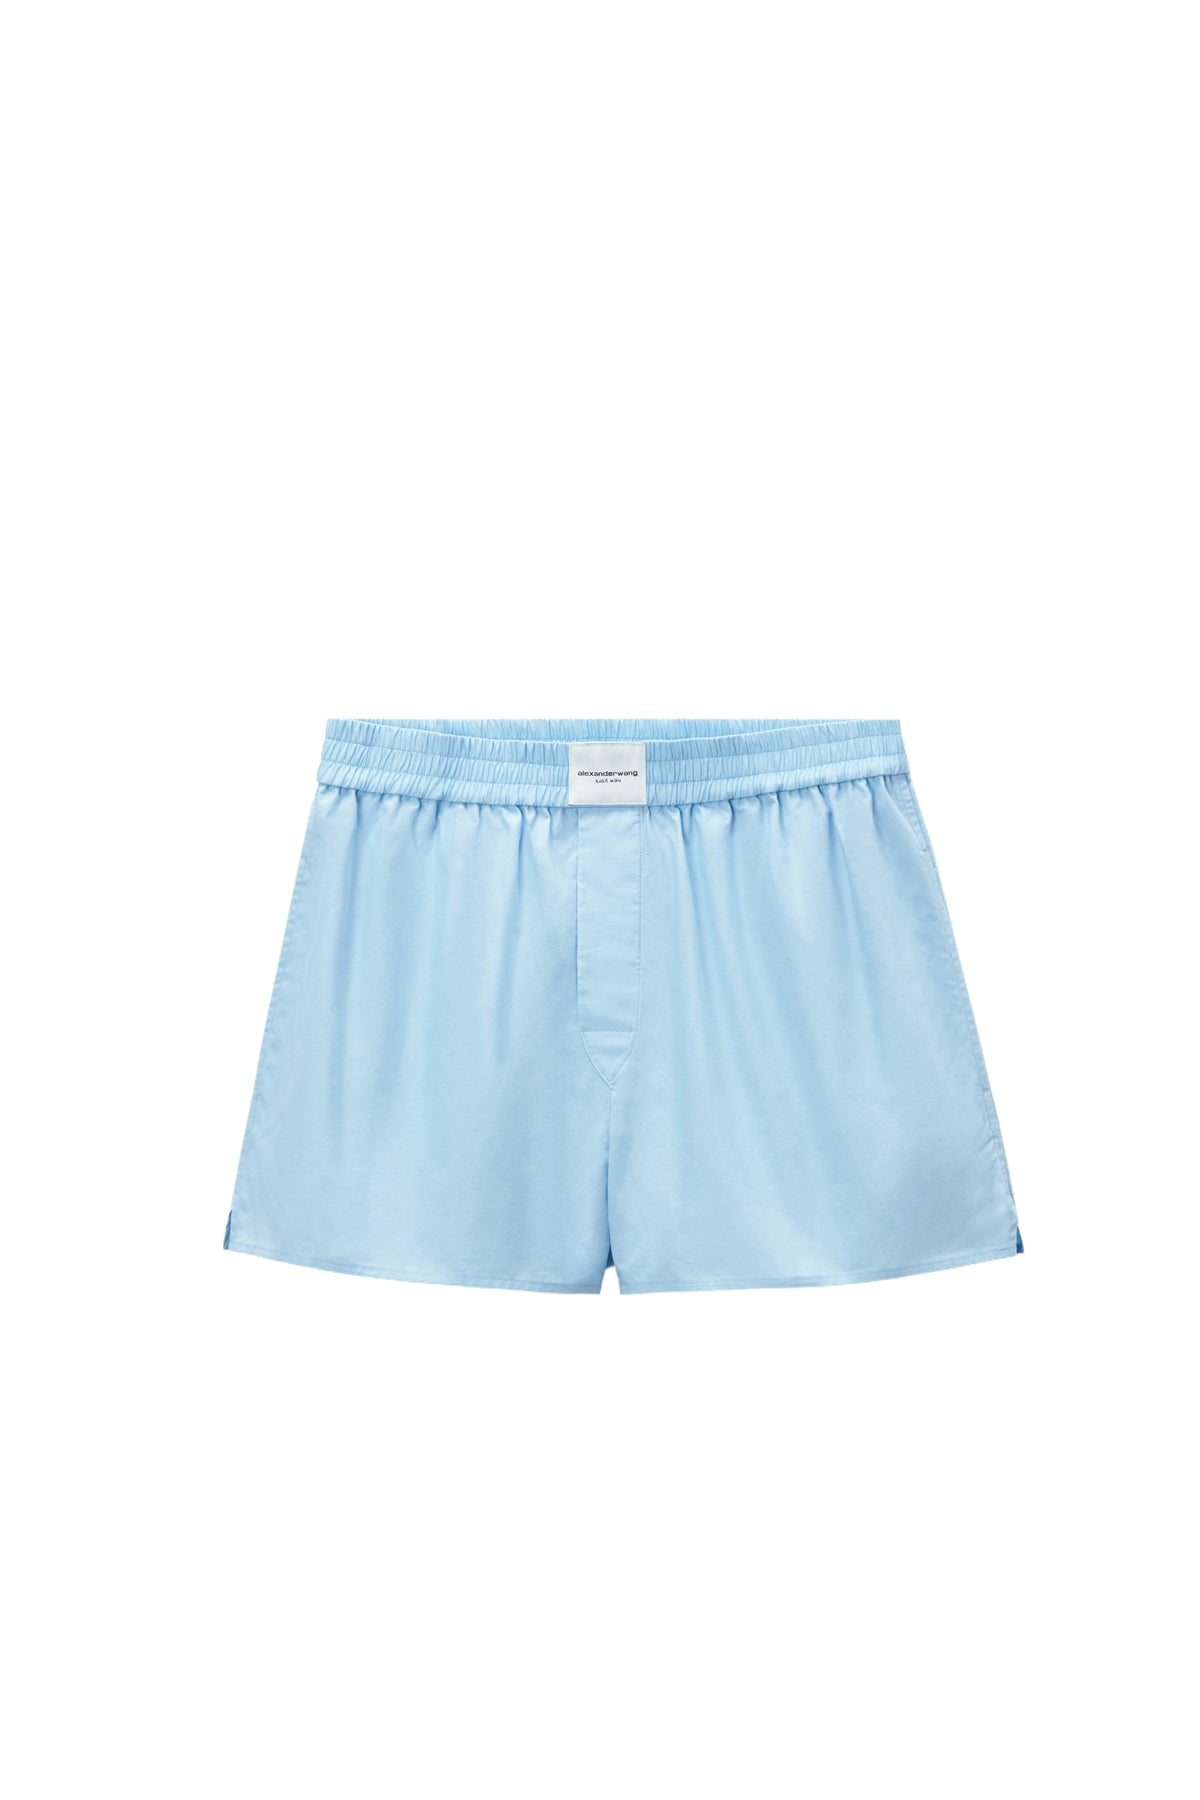 CLASSIC BOXER SHORT / CHAMBRAY BLUE